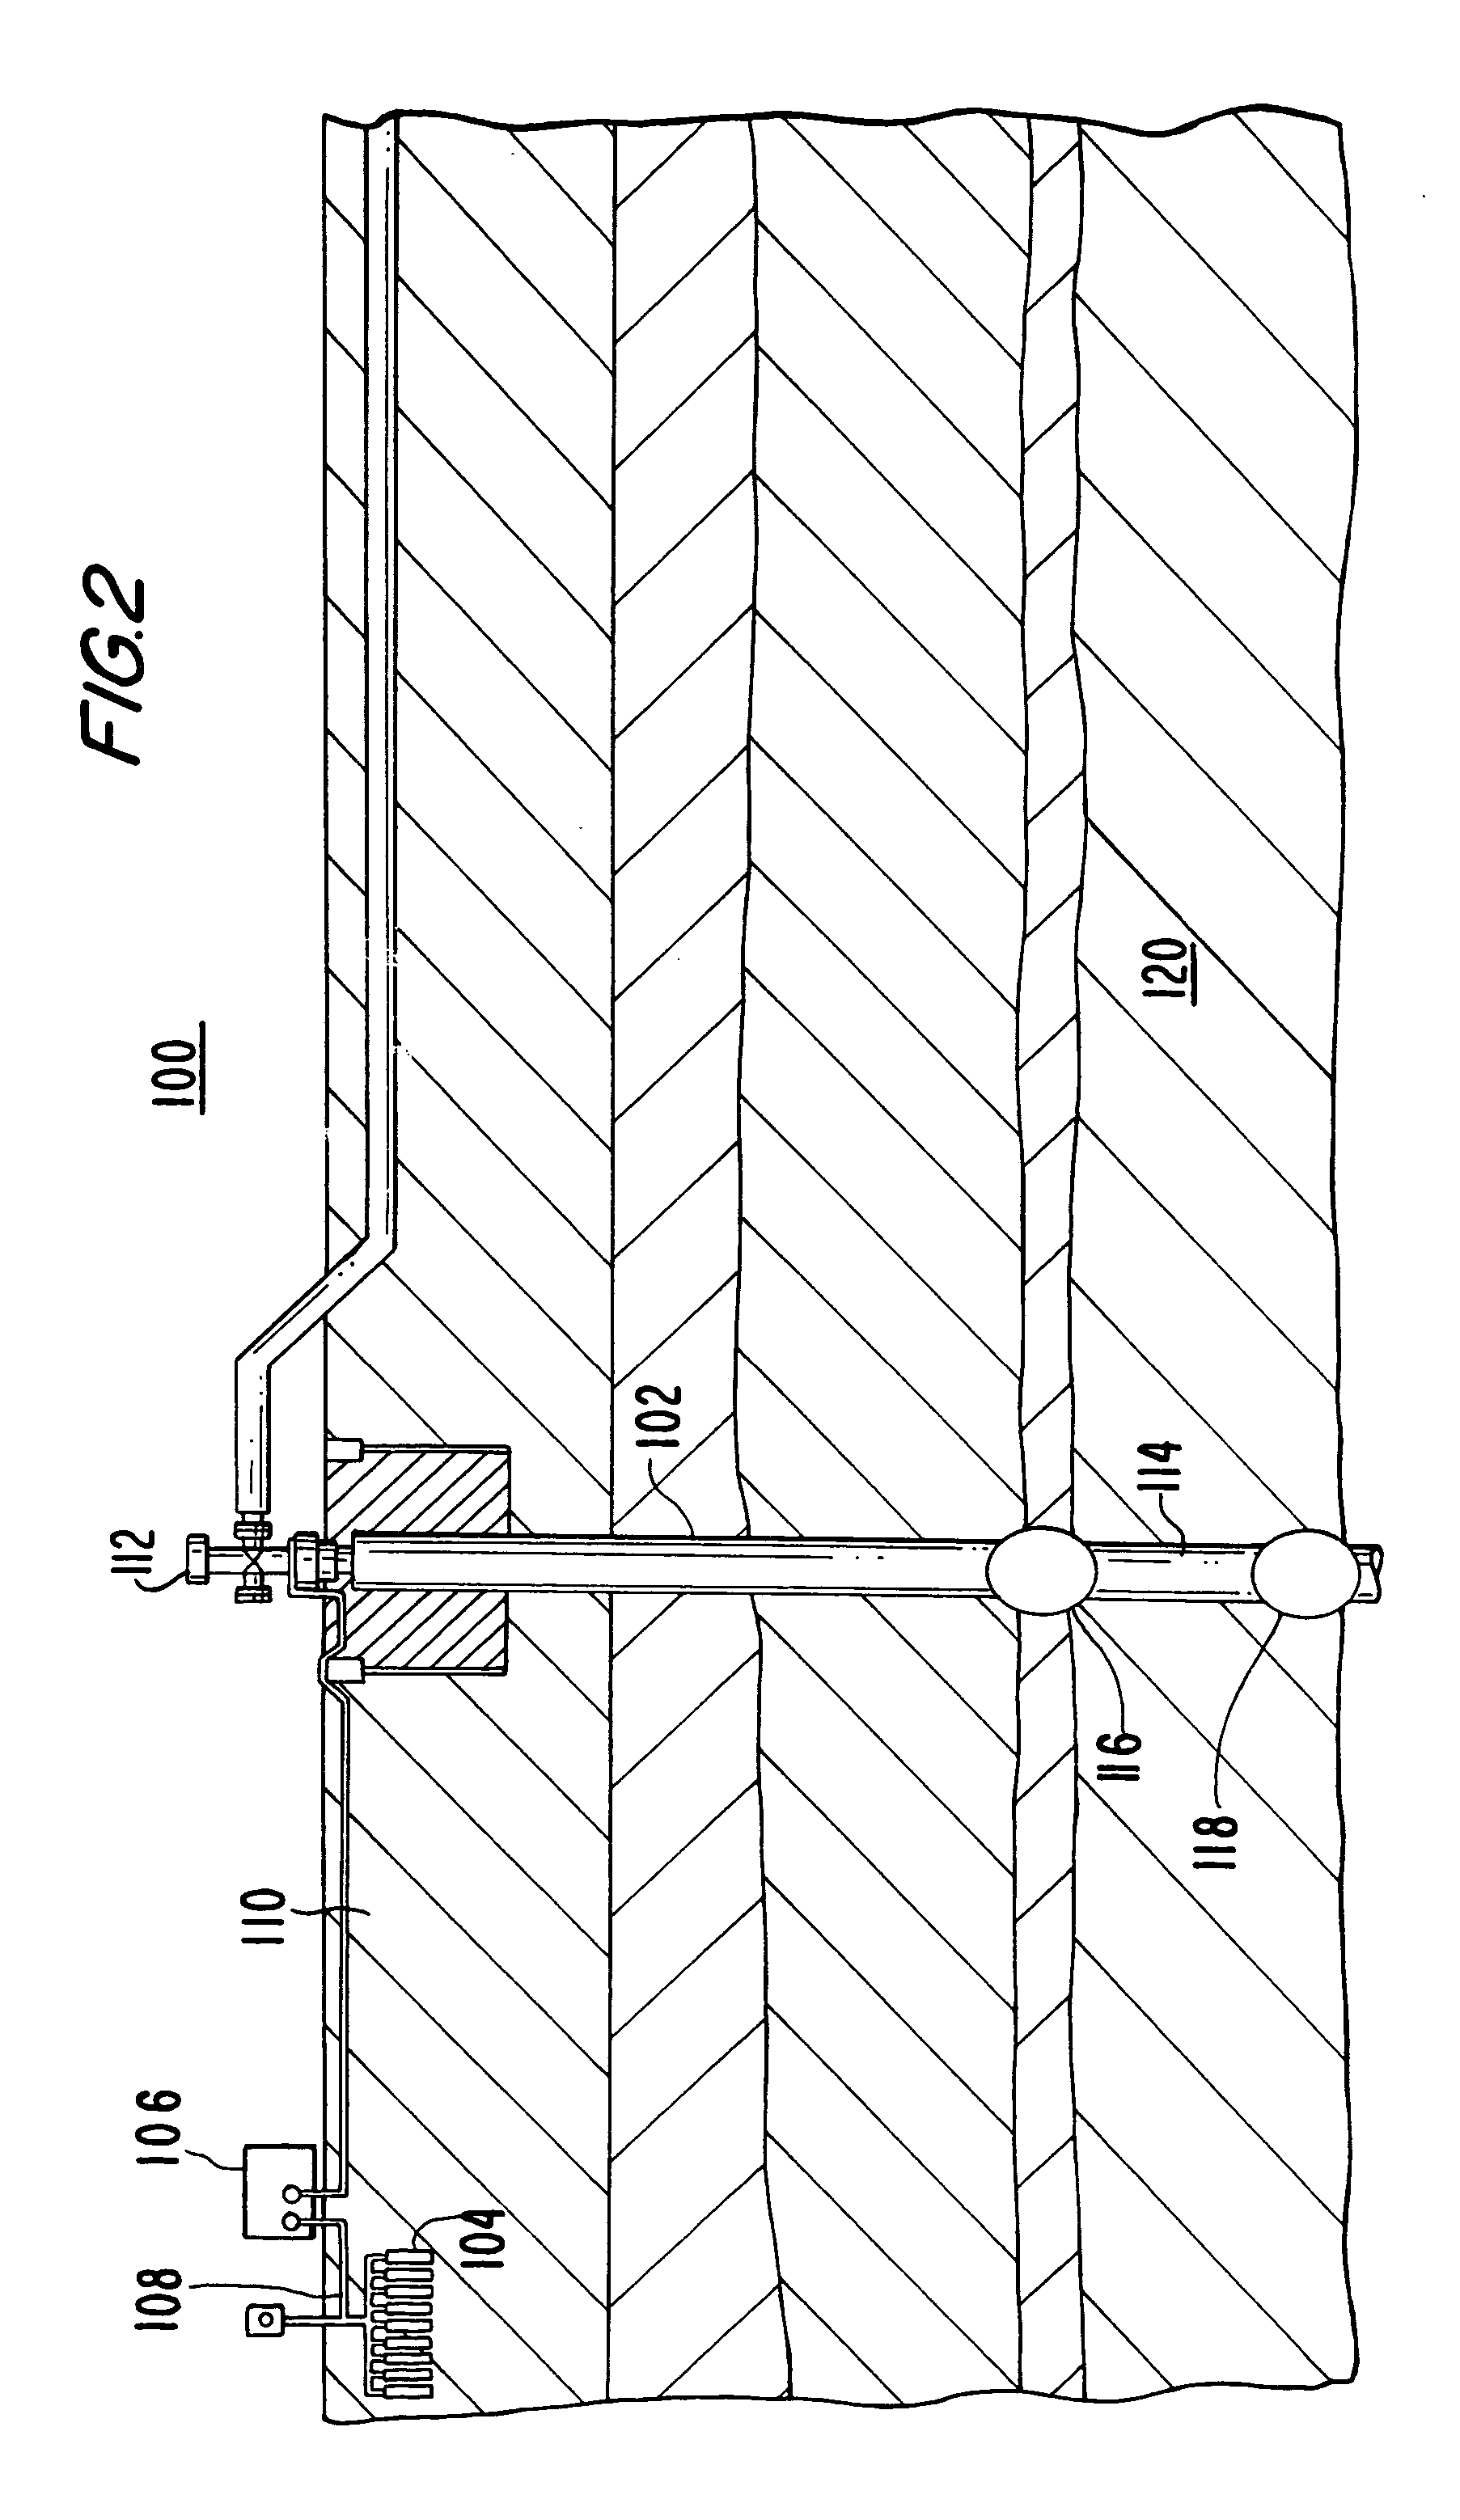 Axial current meter for in-situ continuous monitoring of corrosion and cathodic protection current